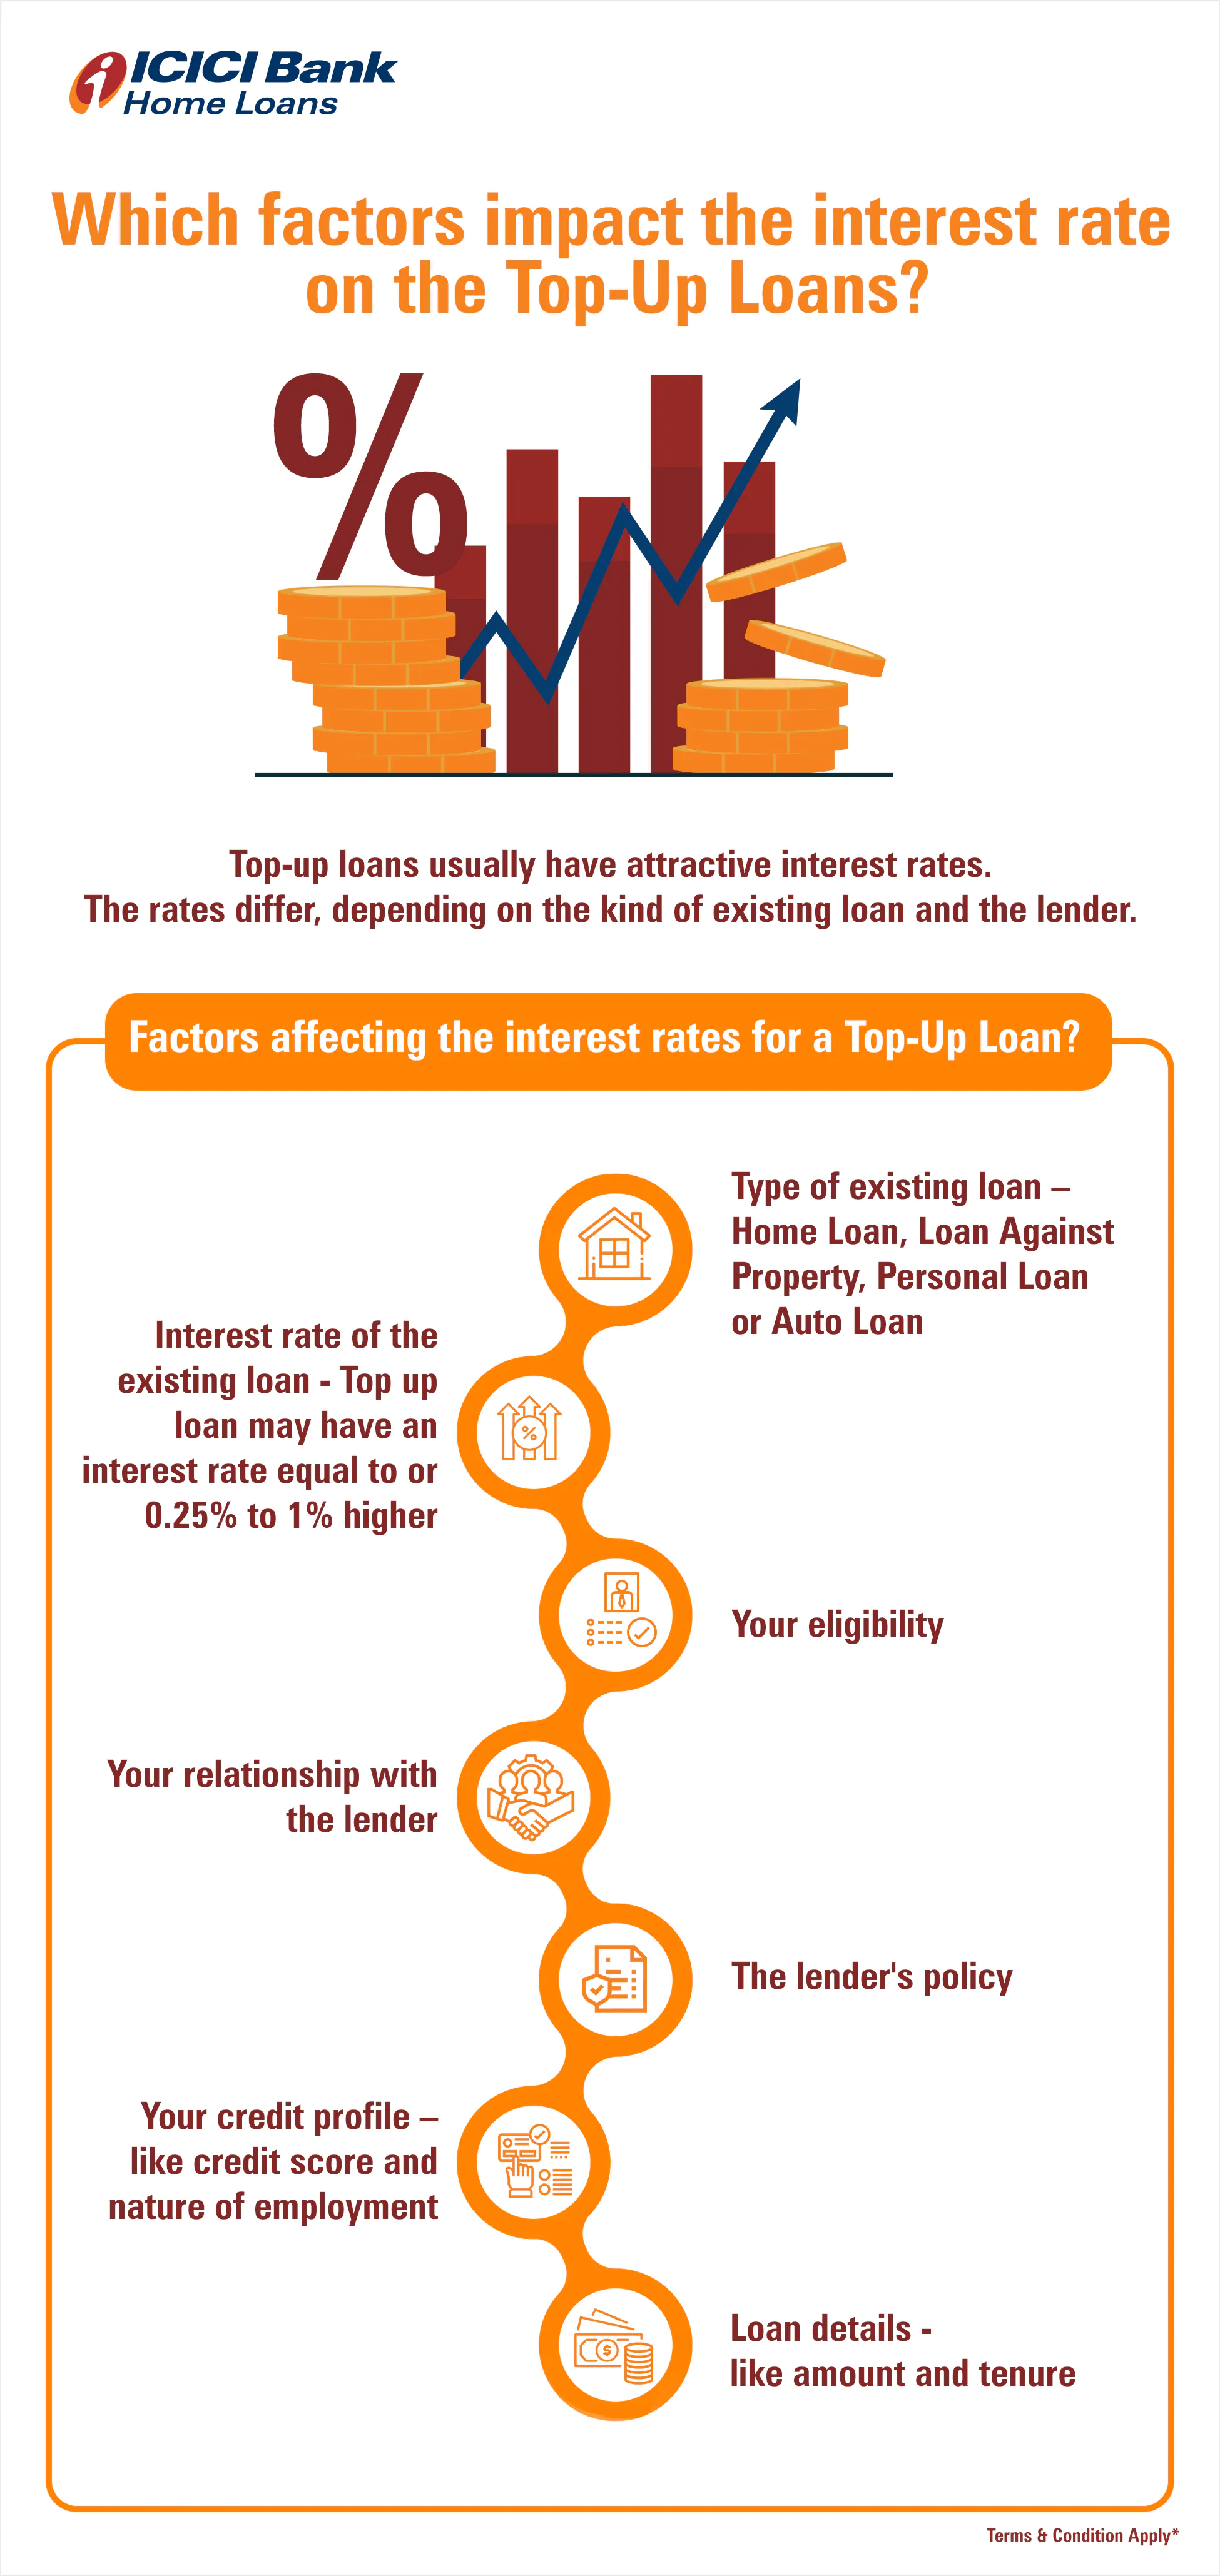 What are the Factors Affecting Top-Up Loan Interest Rates